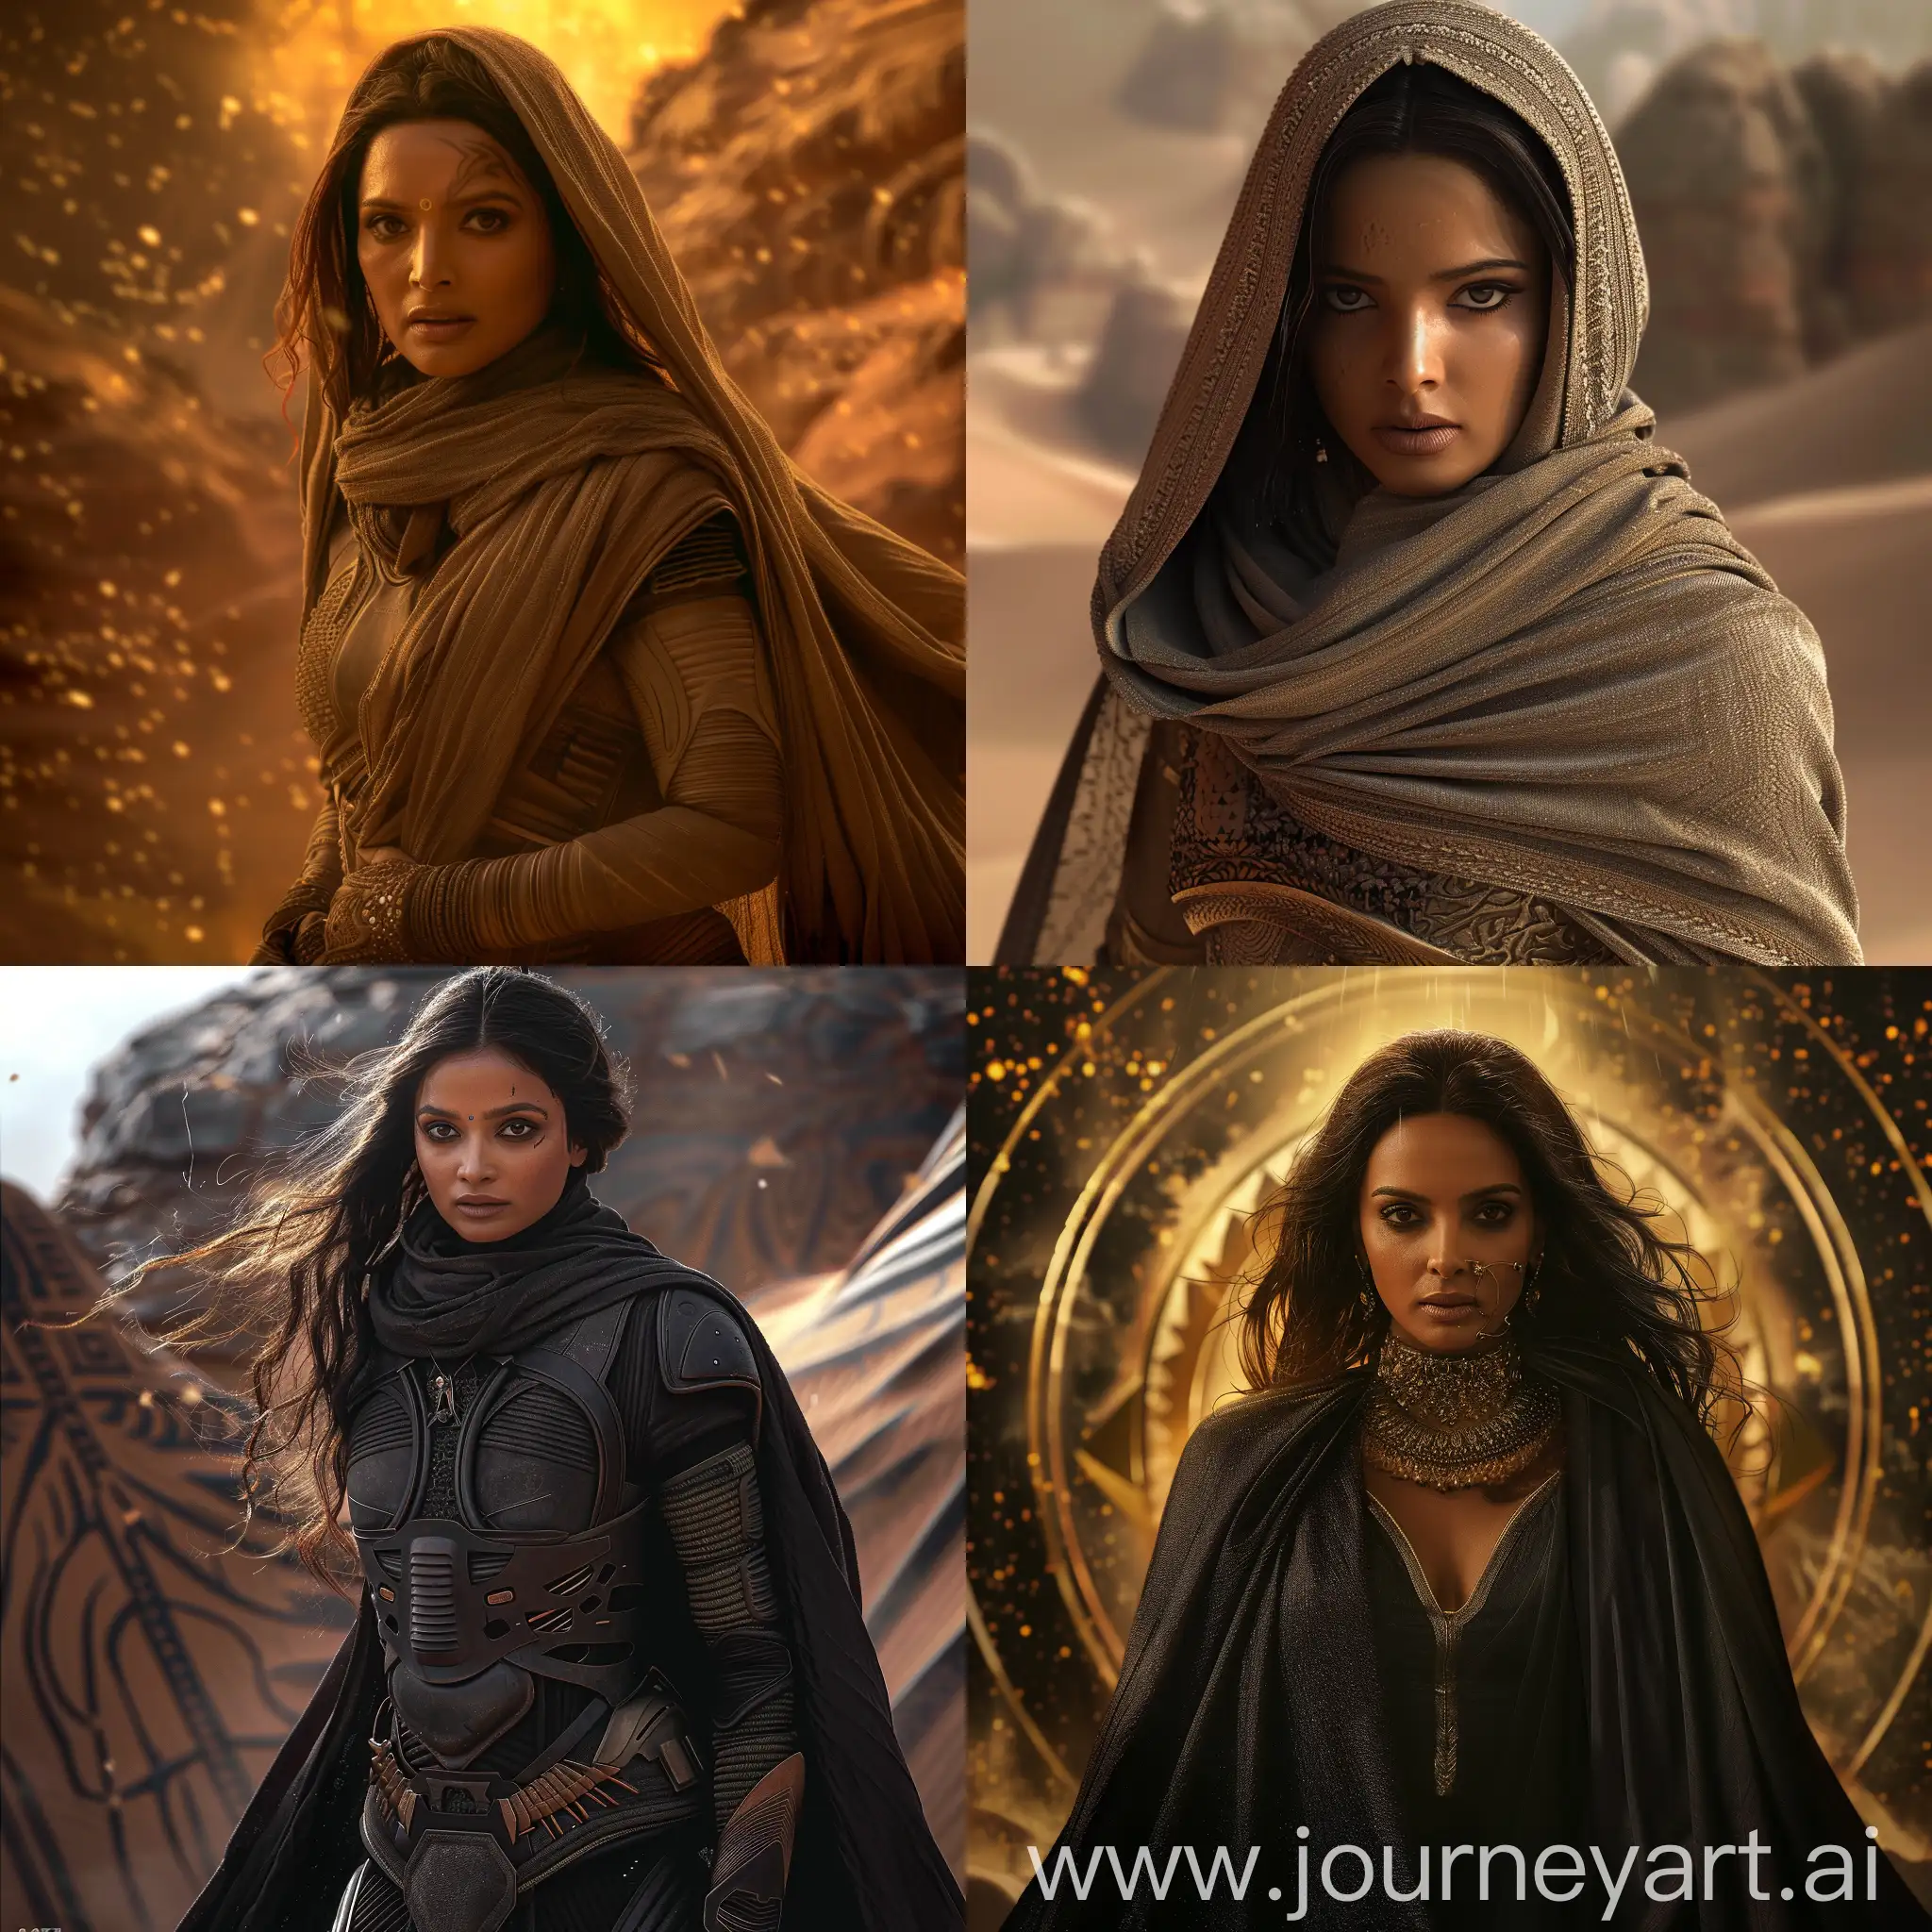 Aishwarya Rai Bachchan steps into the mystical world of Dune as the fierce and formidable Lady Jessica. Her elegance and power will captivate your hearts, cinematic hyper realistic, 8k